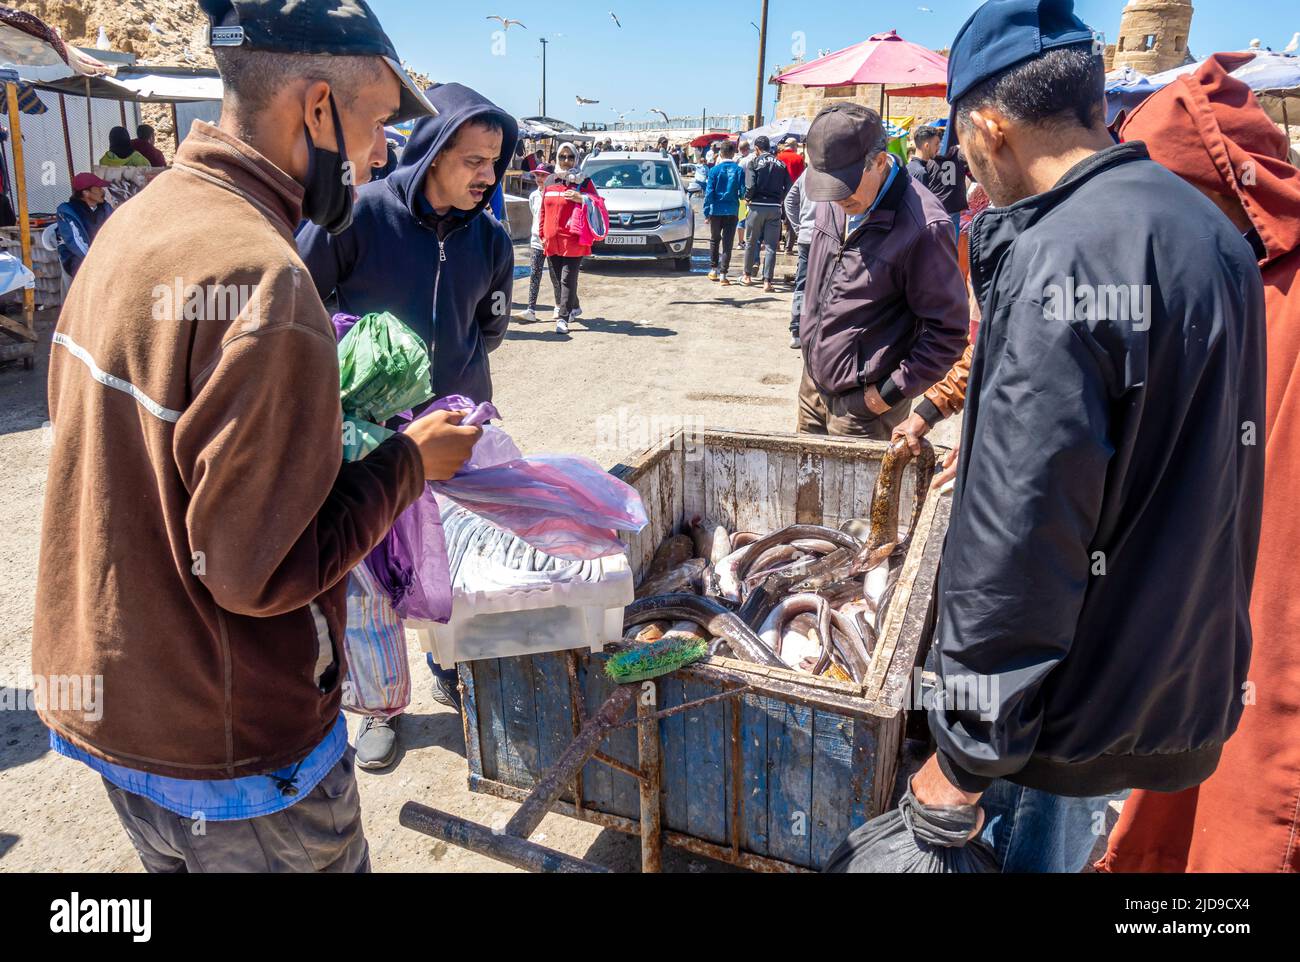 Sellers selling freshly caught eels seafood in the street popular with tourists and locals in Port of Essaouira, Morocco. Stock Photo